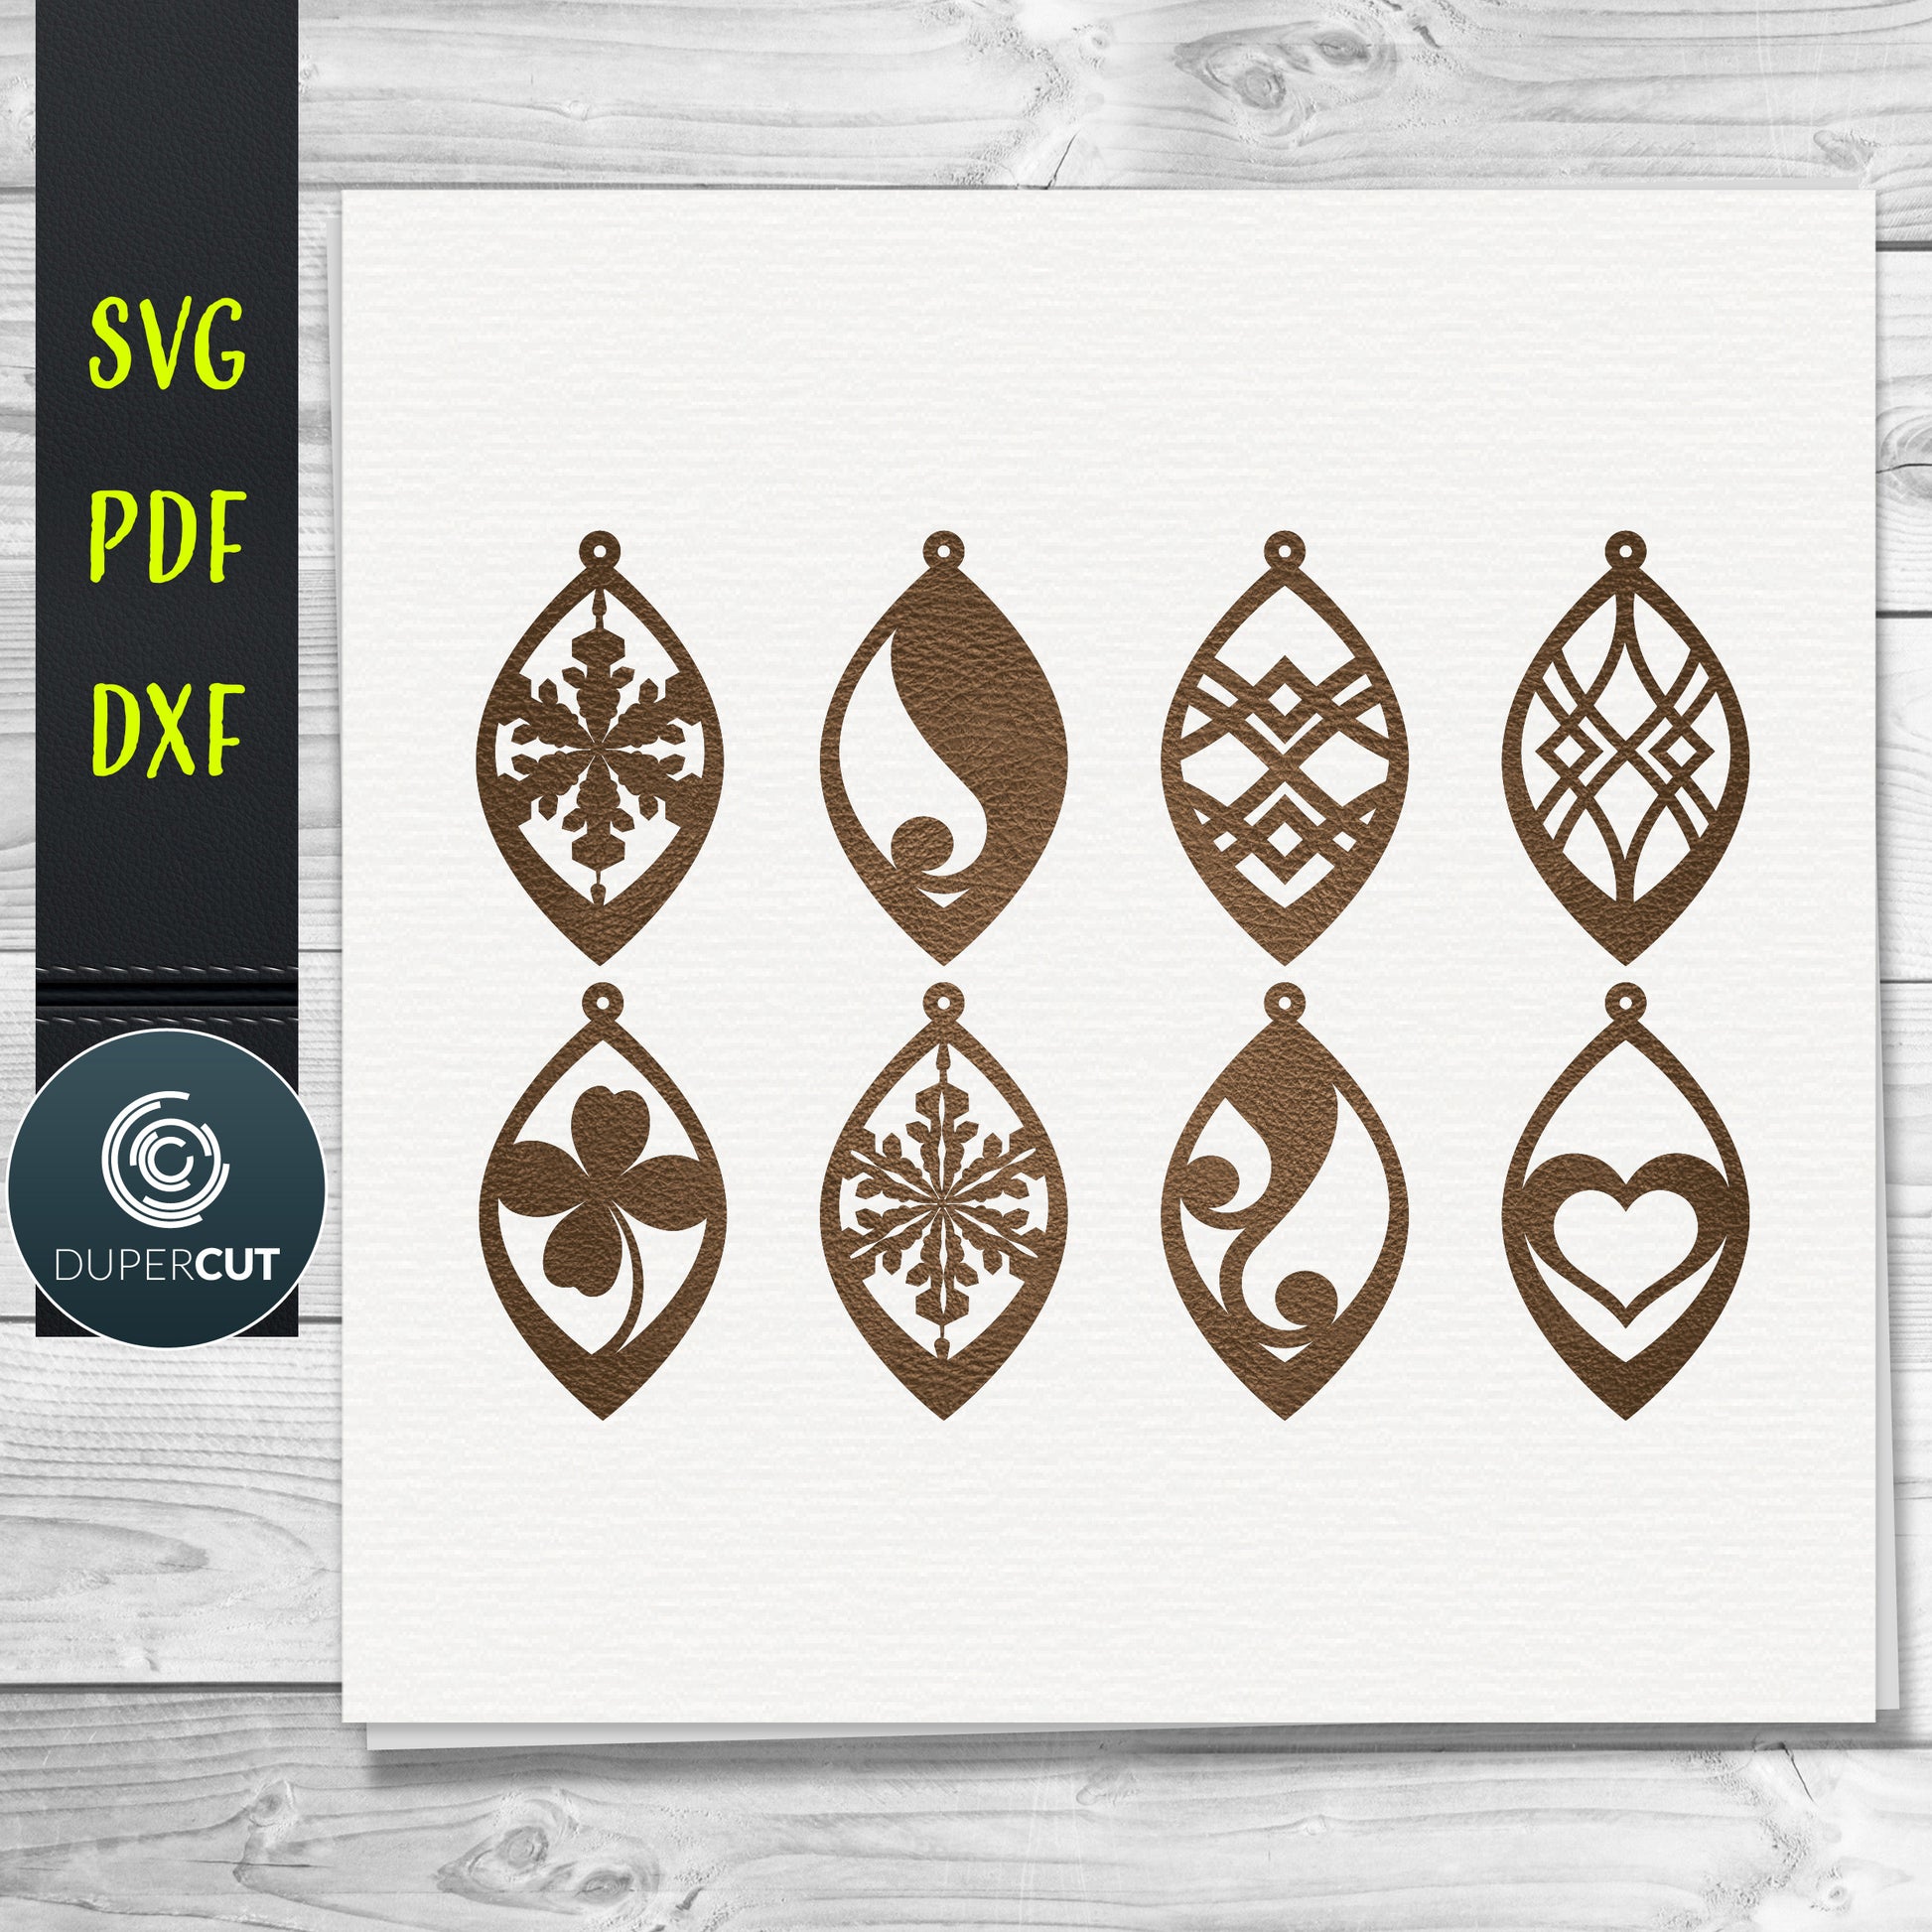 Snowflake earrings, heart. DIY Leather Earrings SVG PDF DXF vector files. Jewellery making template for laser and cutting machines - Glowforge, Cricut, Silhouette Cameo.